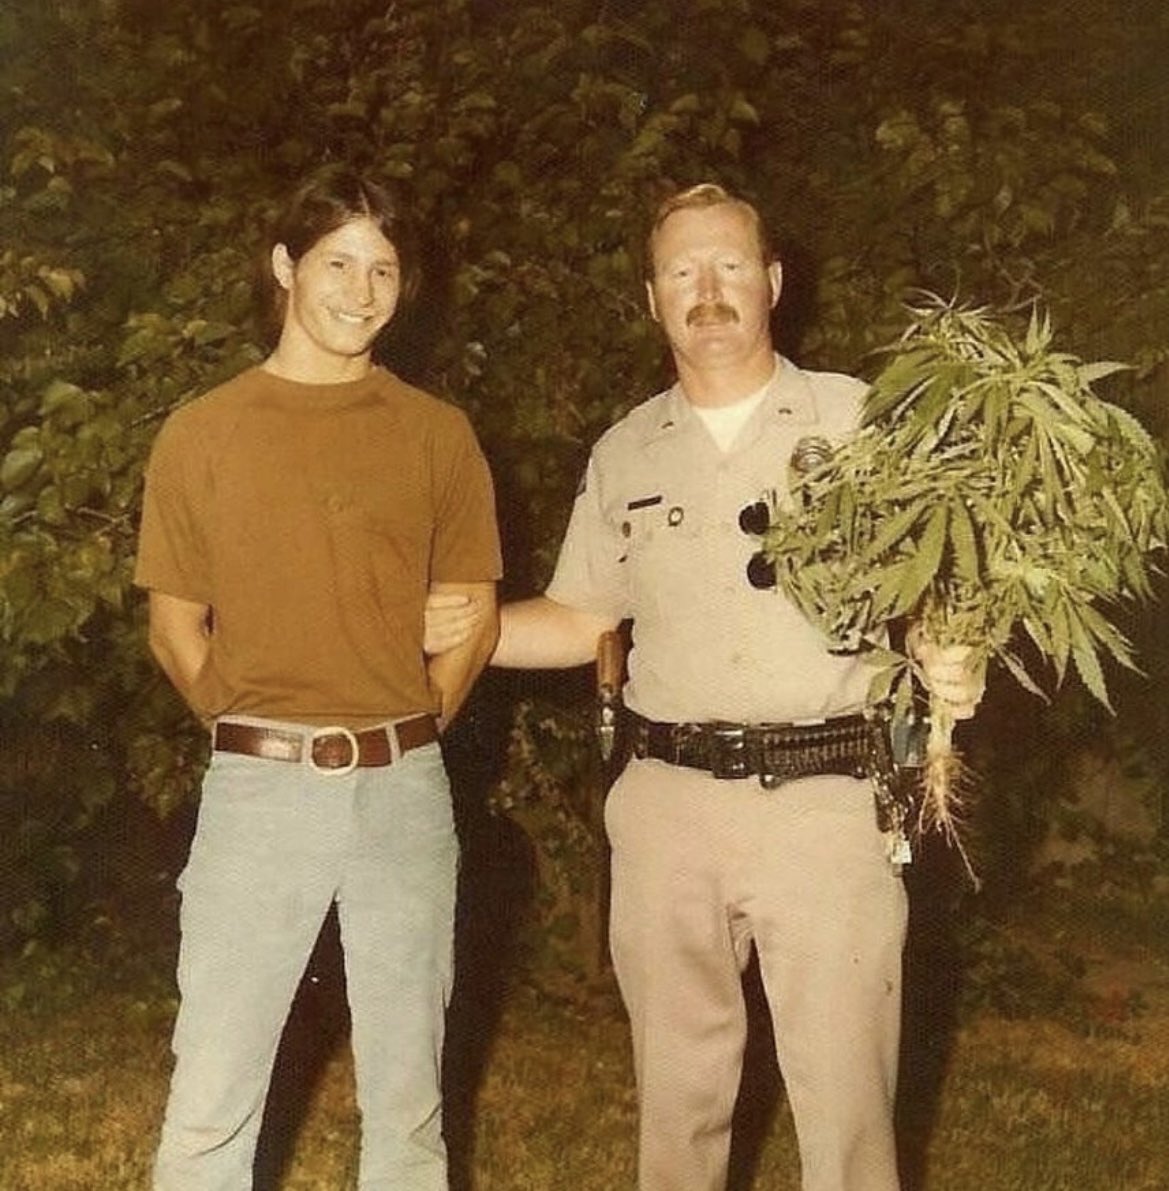 A man gets arrested for growing marijuana in the 1970s.